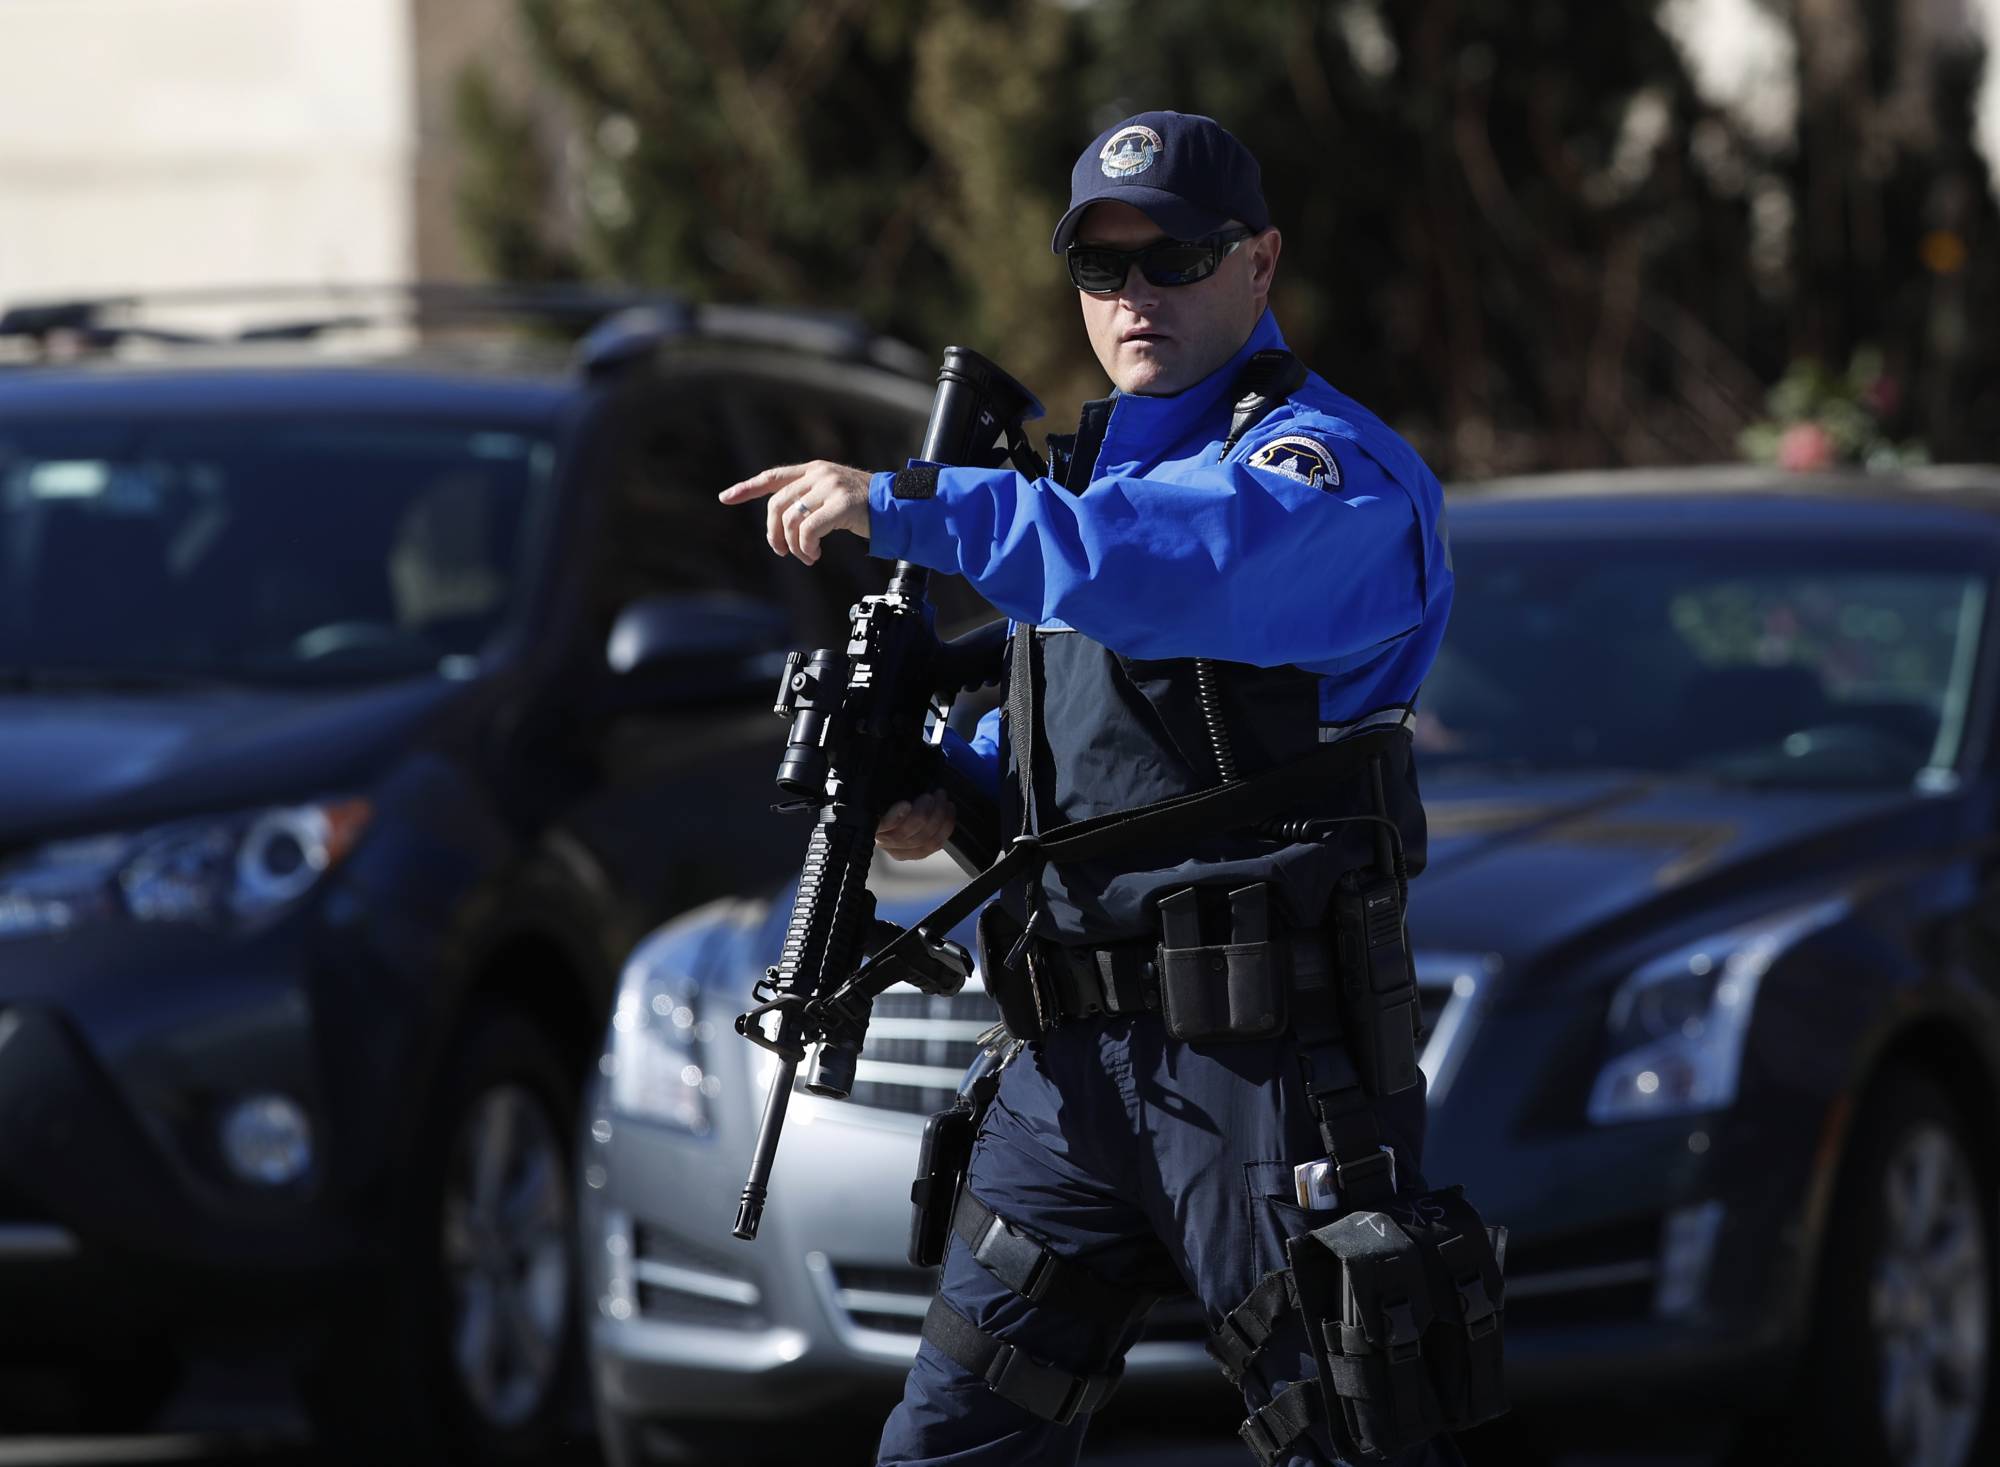 Armed U.S. Capitol Police officer take position near the Botanic Gardens in Washington, Wednesday, March 29, 2017. A woman struck a U.S. Capitol Police cruiser with a vehicle near the Capitol and was taken into custody, police said.  (AP Photo/Manuel Balce Ceneta)